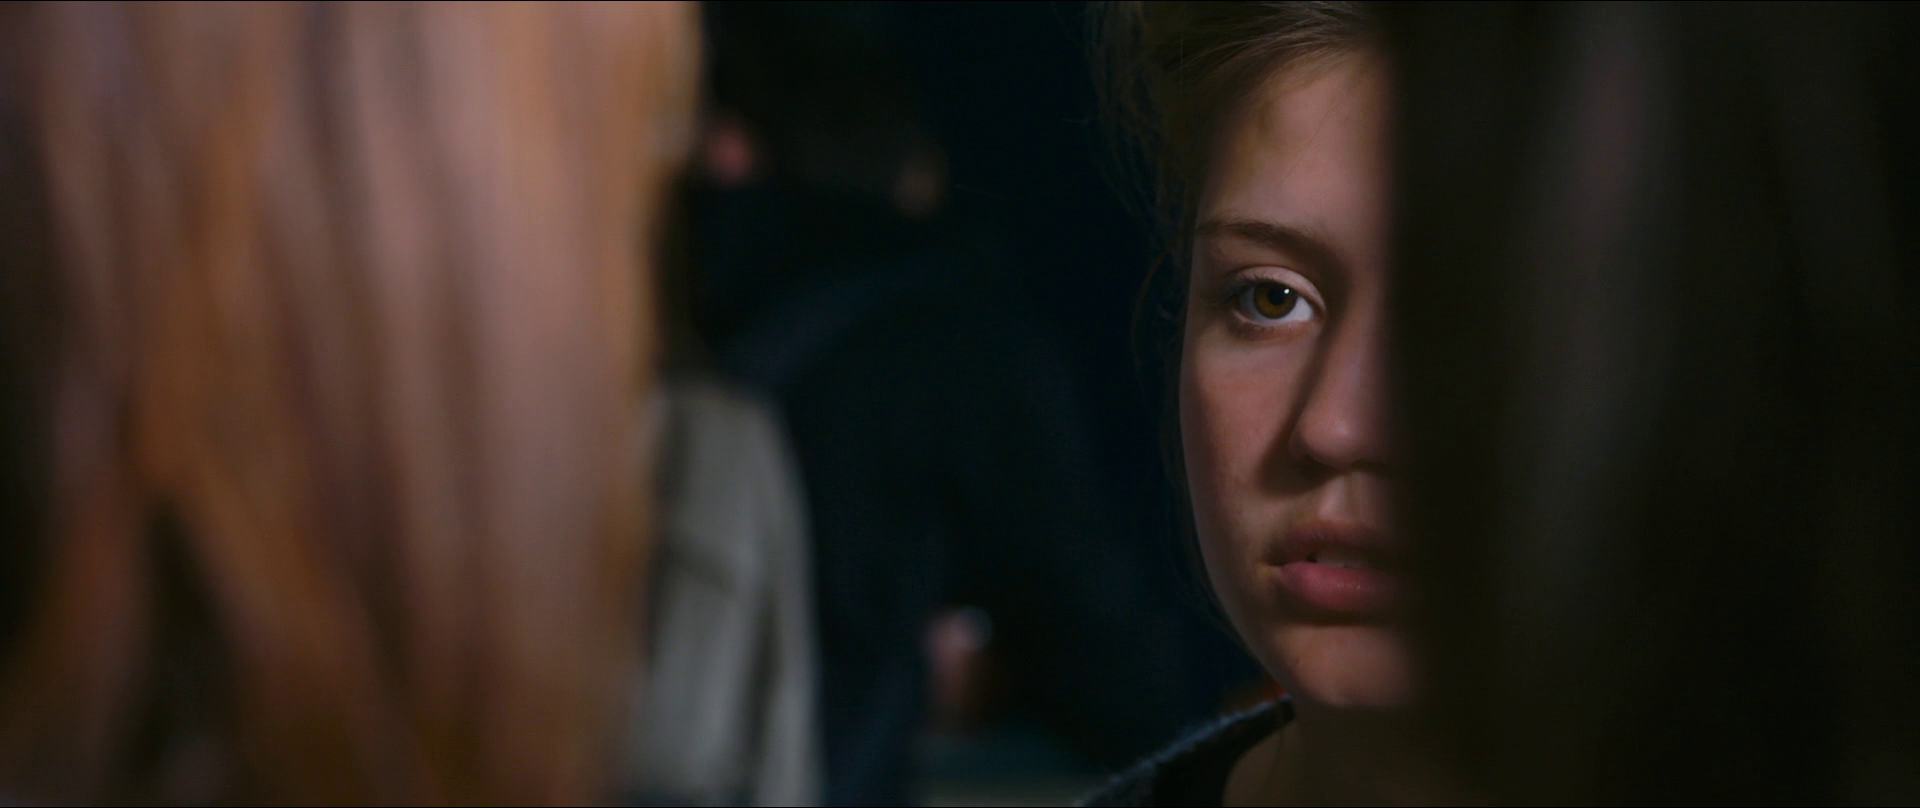  Blue.Is.the.Warmest.Color.2013.1080p.BluRay.x264-PSYCHD 12.03GB-2.png